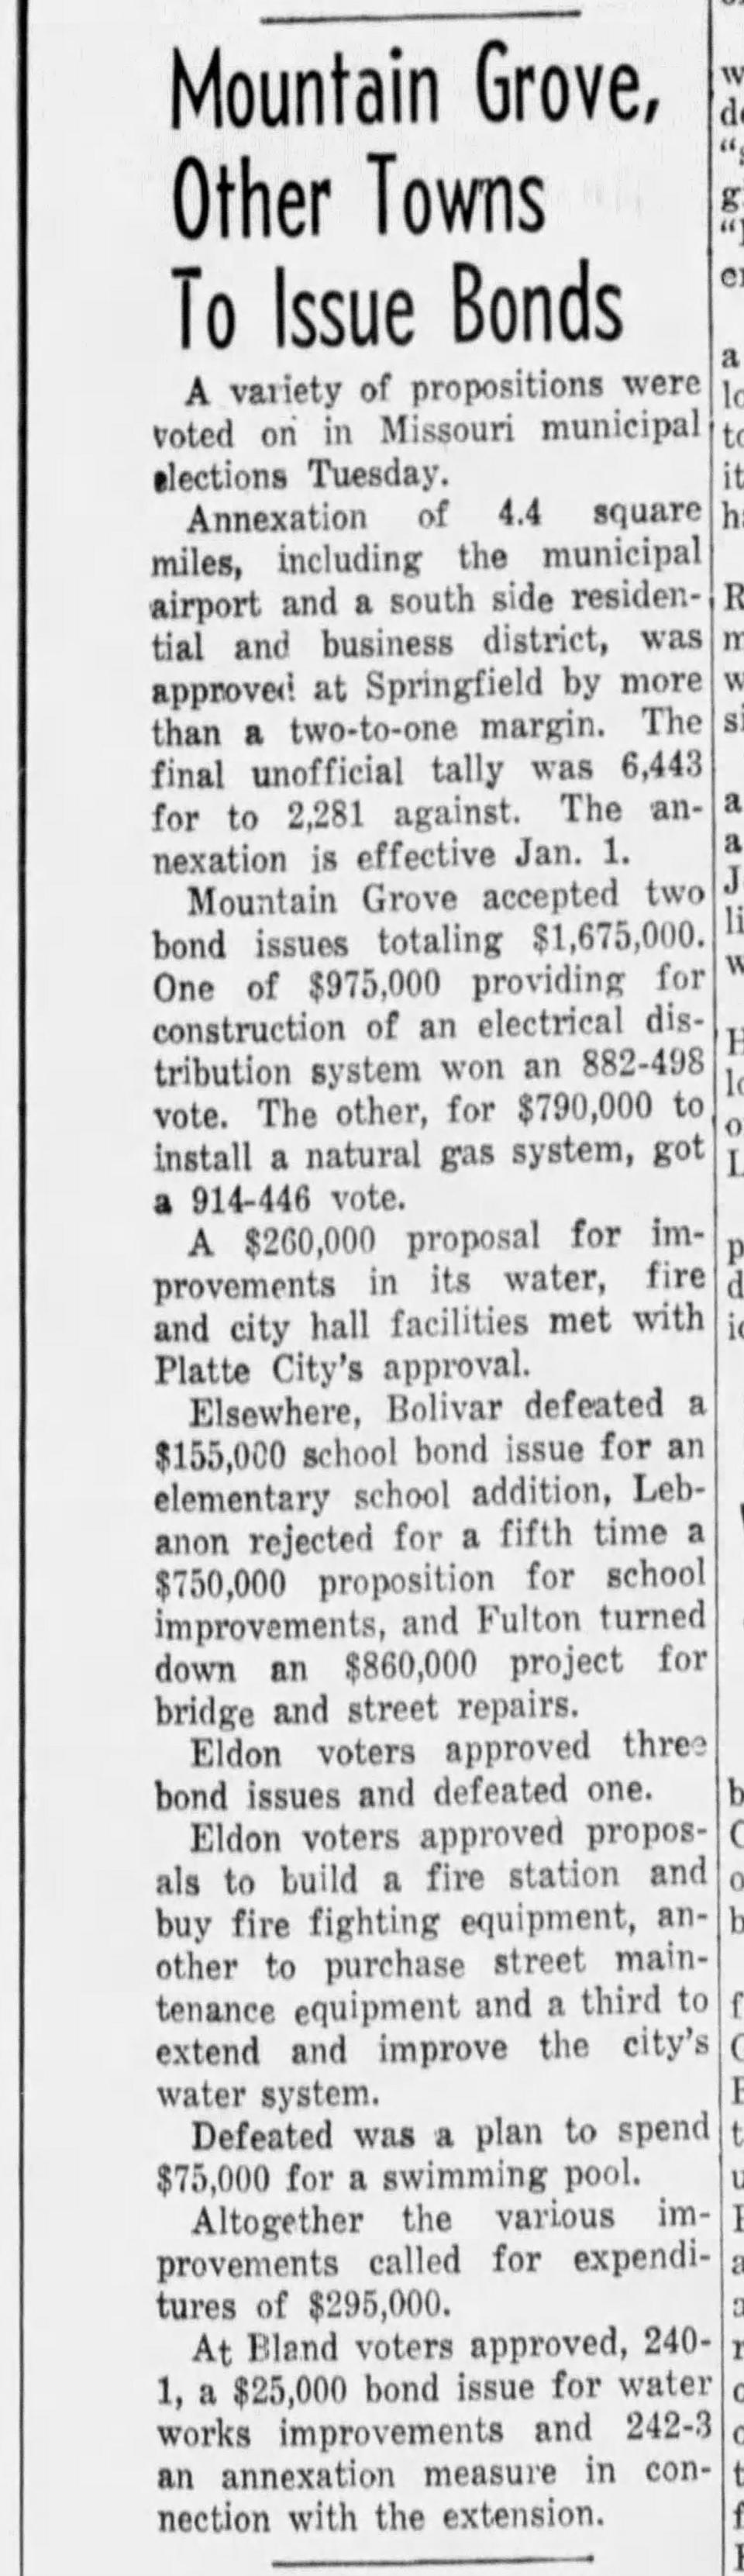 An article about the Mountain Grove bonds approved by voters in the Poplar Bluff Republican published on Nov. 30, 1967.